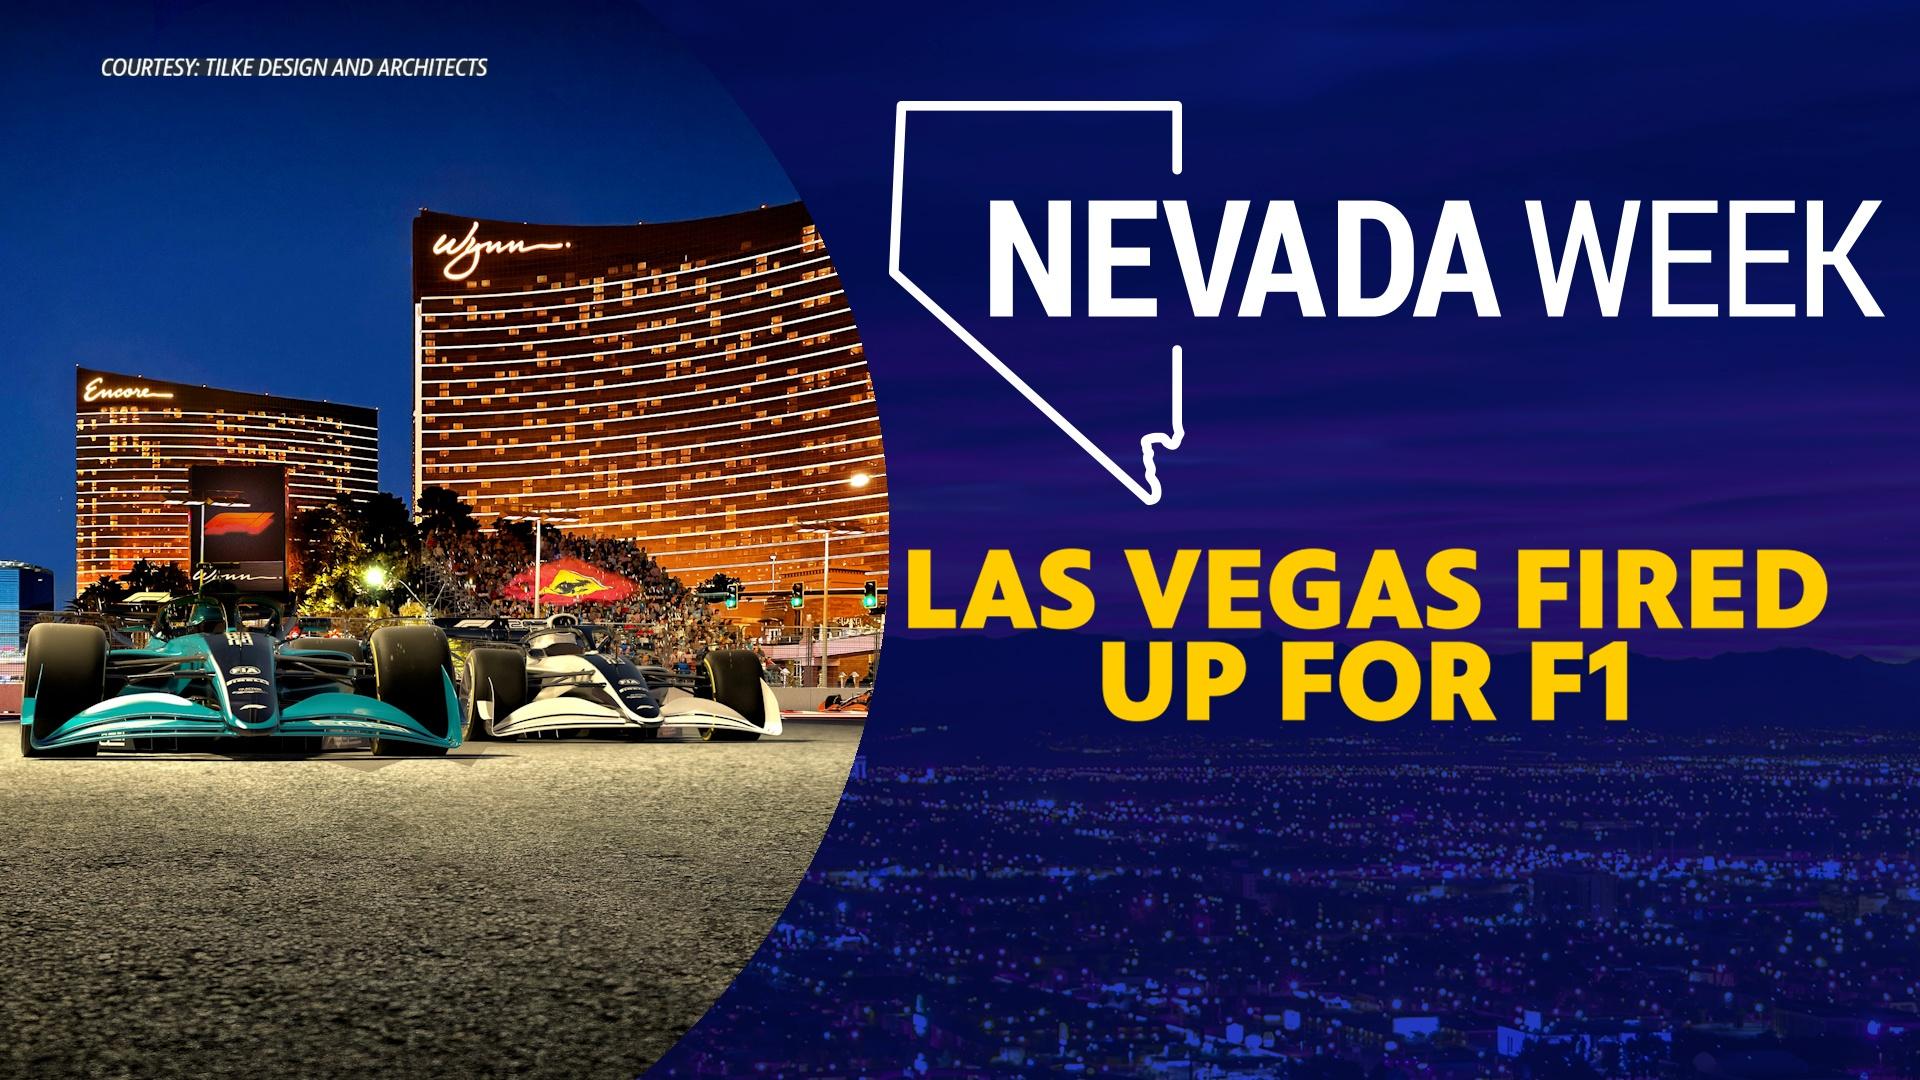 Las Vegas Grand Prix offer of a $200 discount doesn't go far